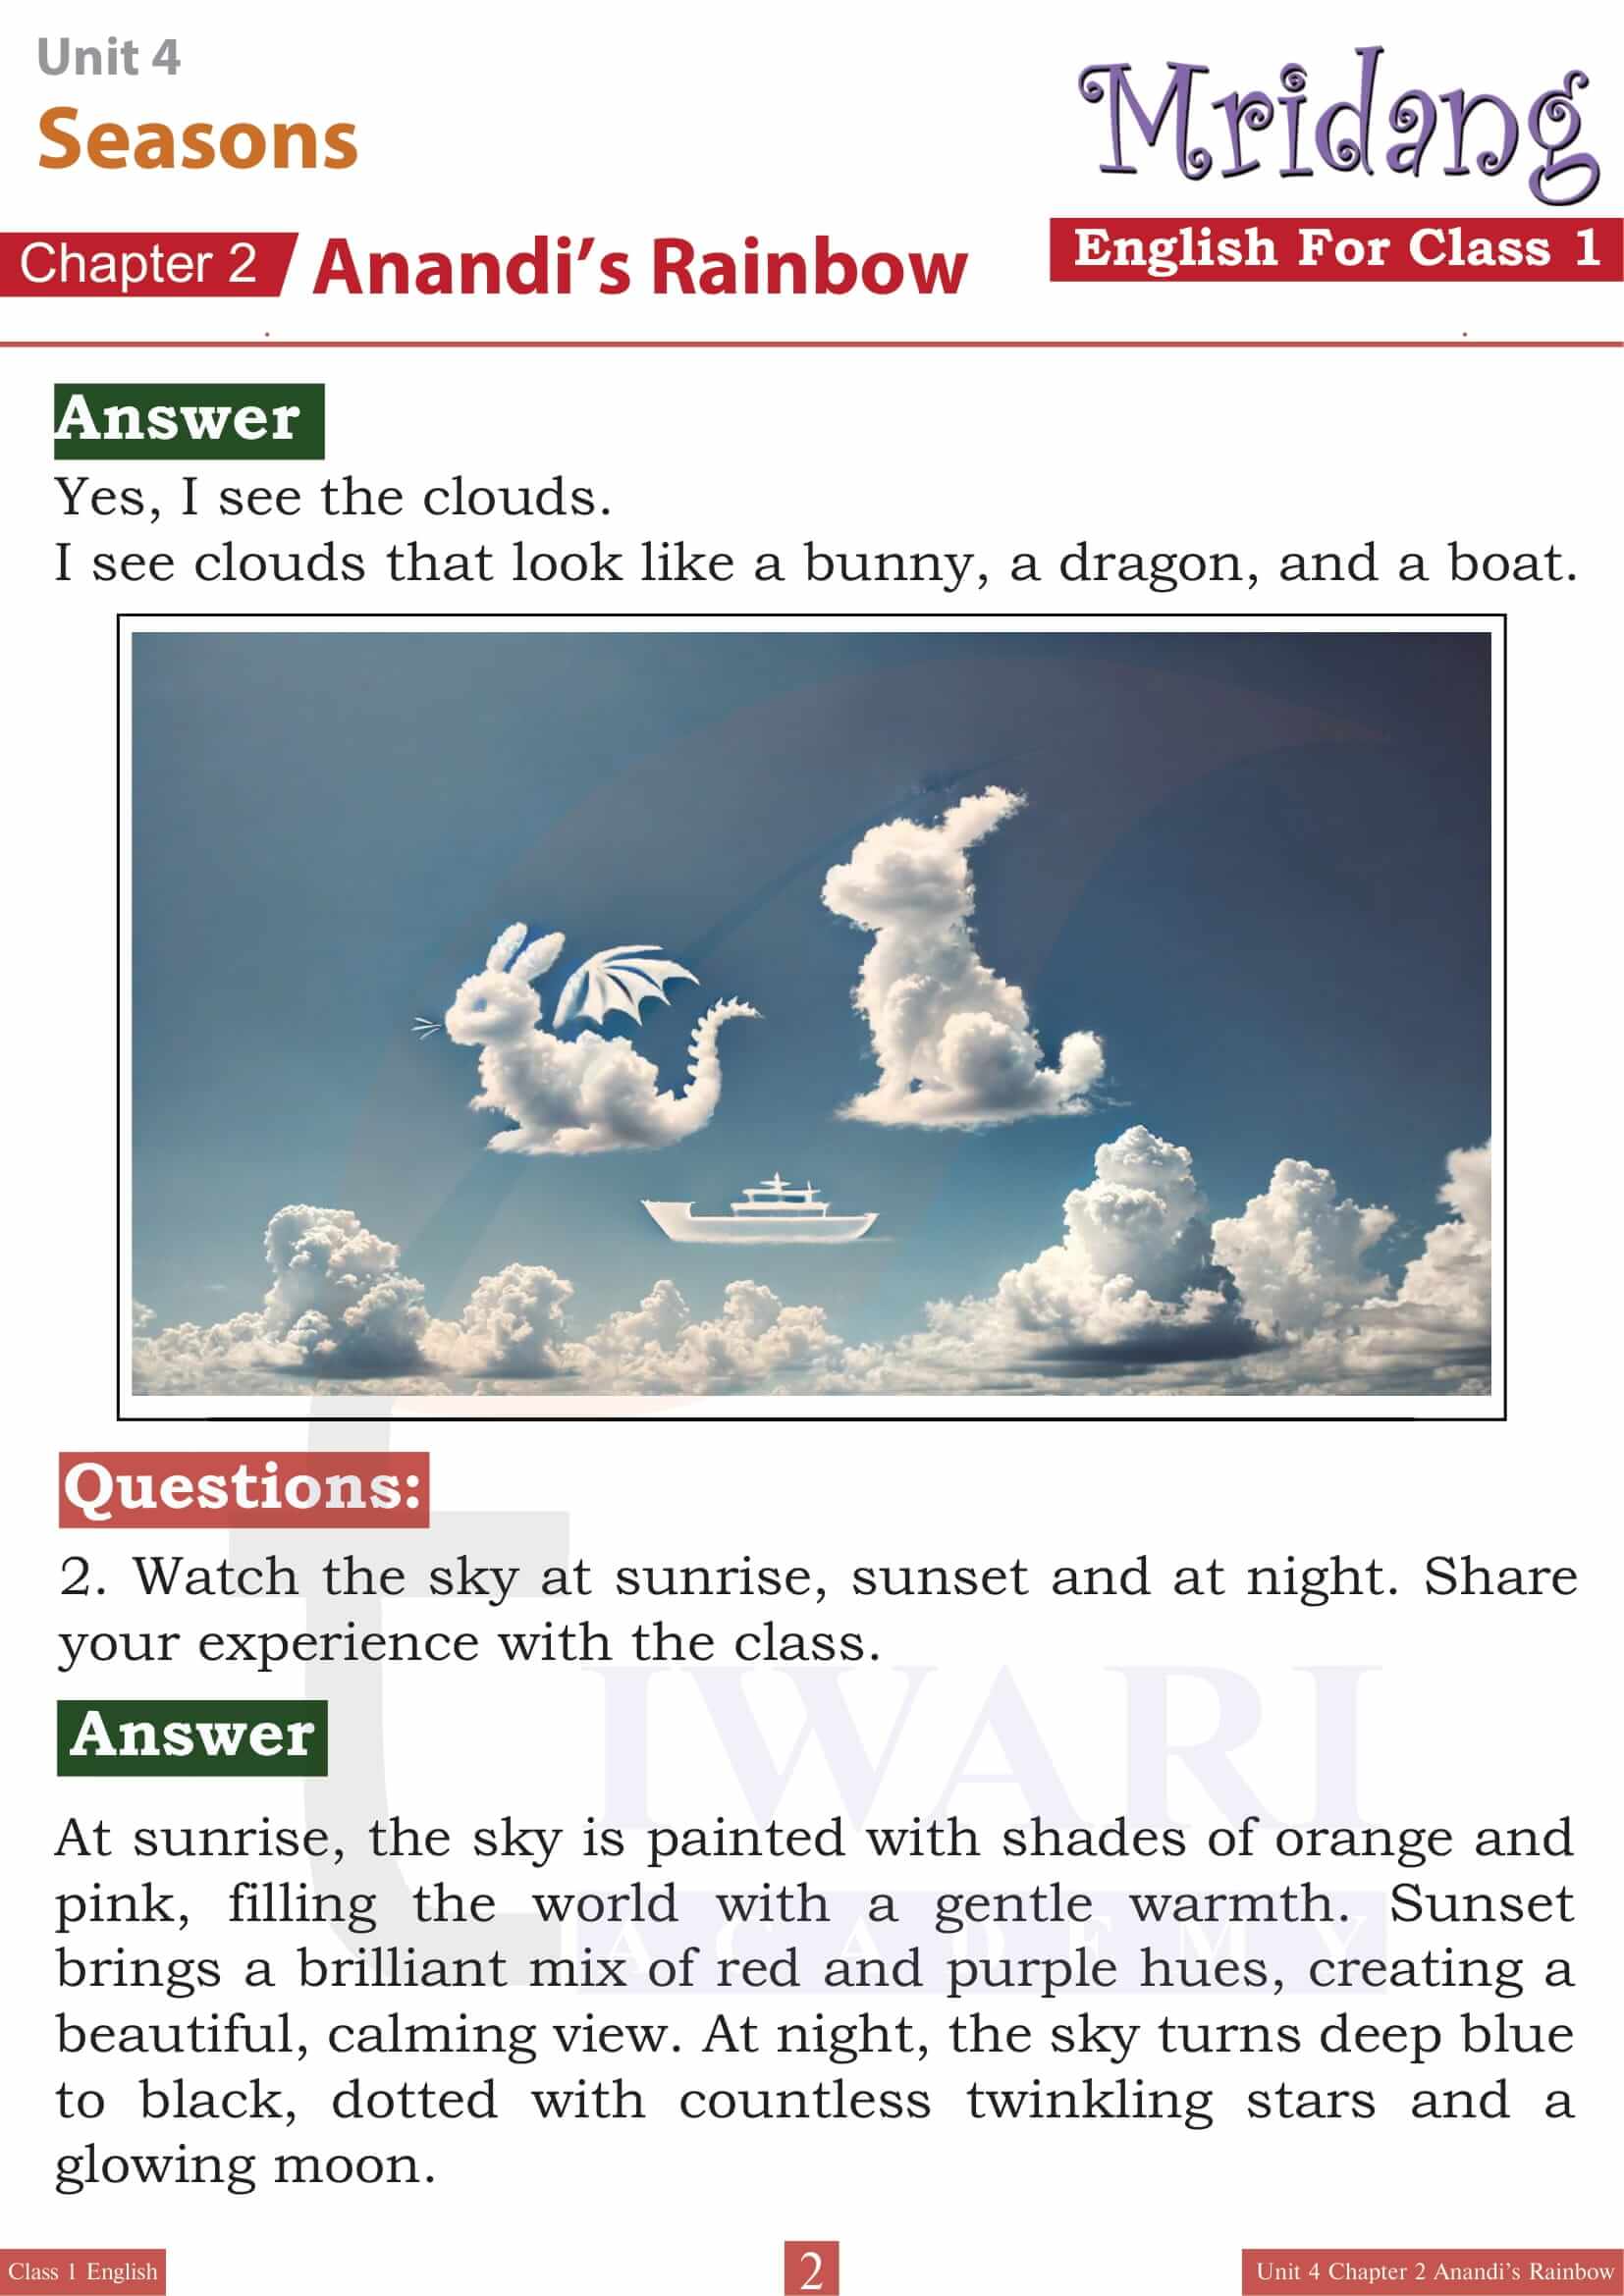 NCERT Solutions for Class 1 English Mridang Unit 4 Seasons Chapter 2 Anandi’s Rainbow Question Answers